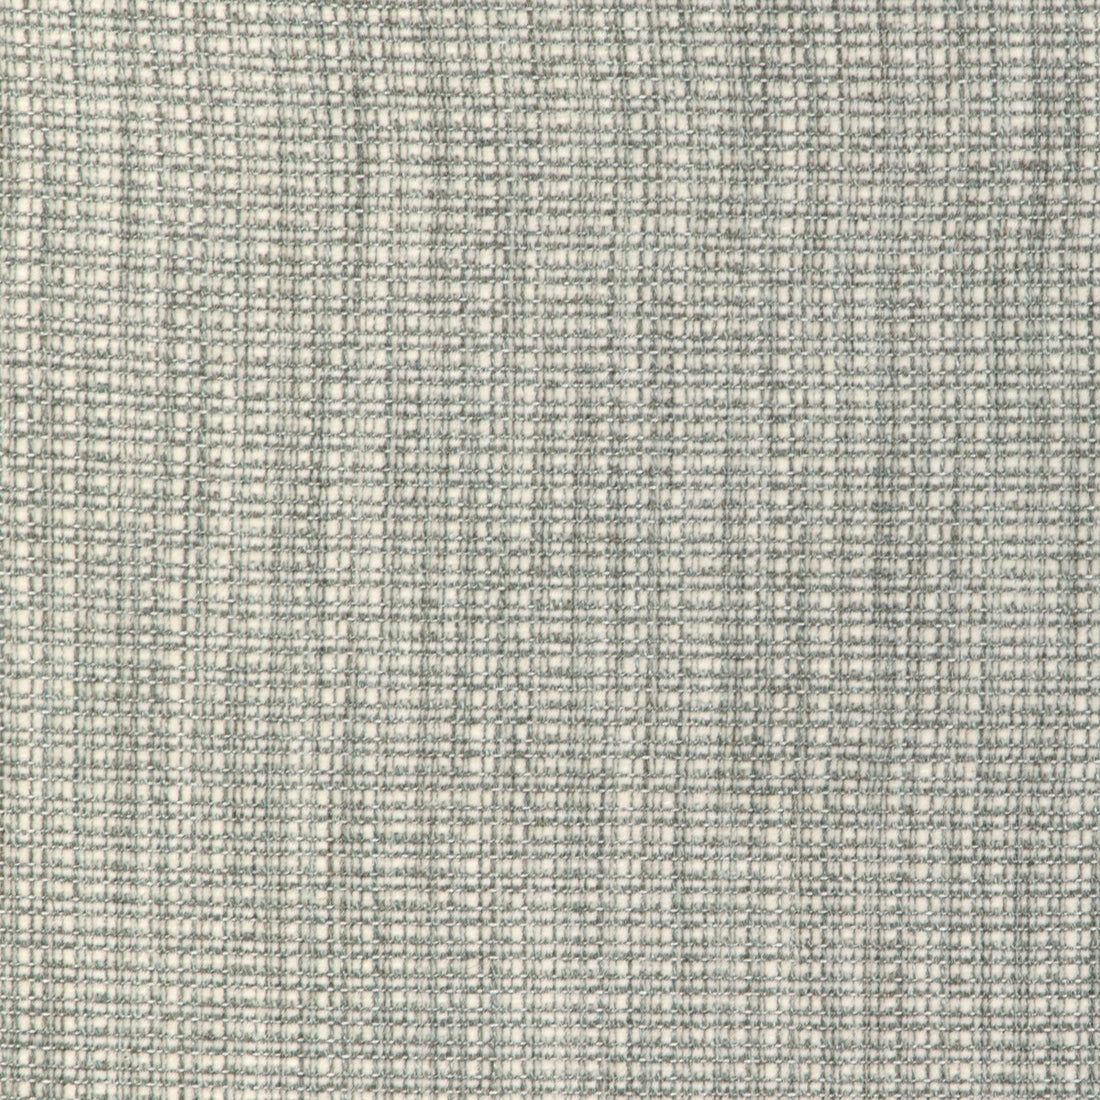 Kravet Design fabric in 36958-135 color - pattern 36958.135.0 - by Kravet Design in the Sustainable Textures II collection